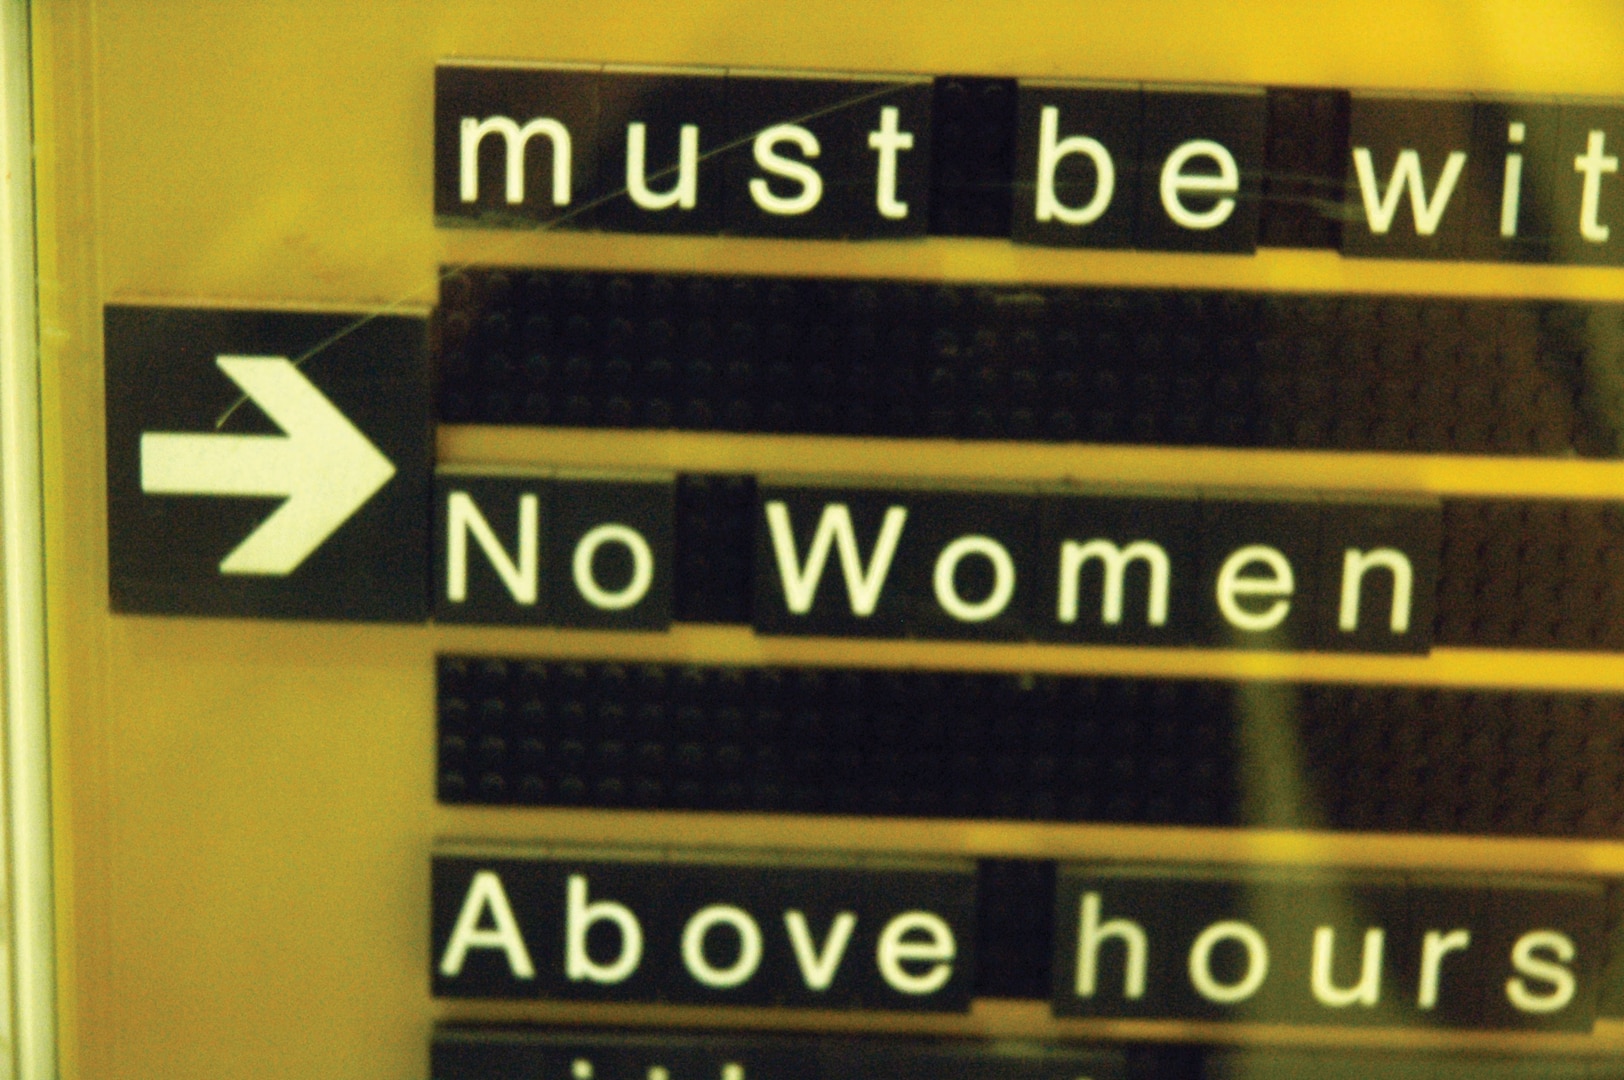 A sign in Jeddah, Saudi Arabia stipulates that women are not allowed to enter a hotel gym.